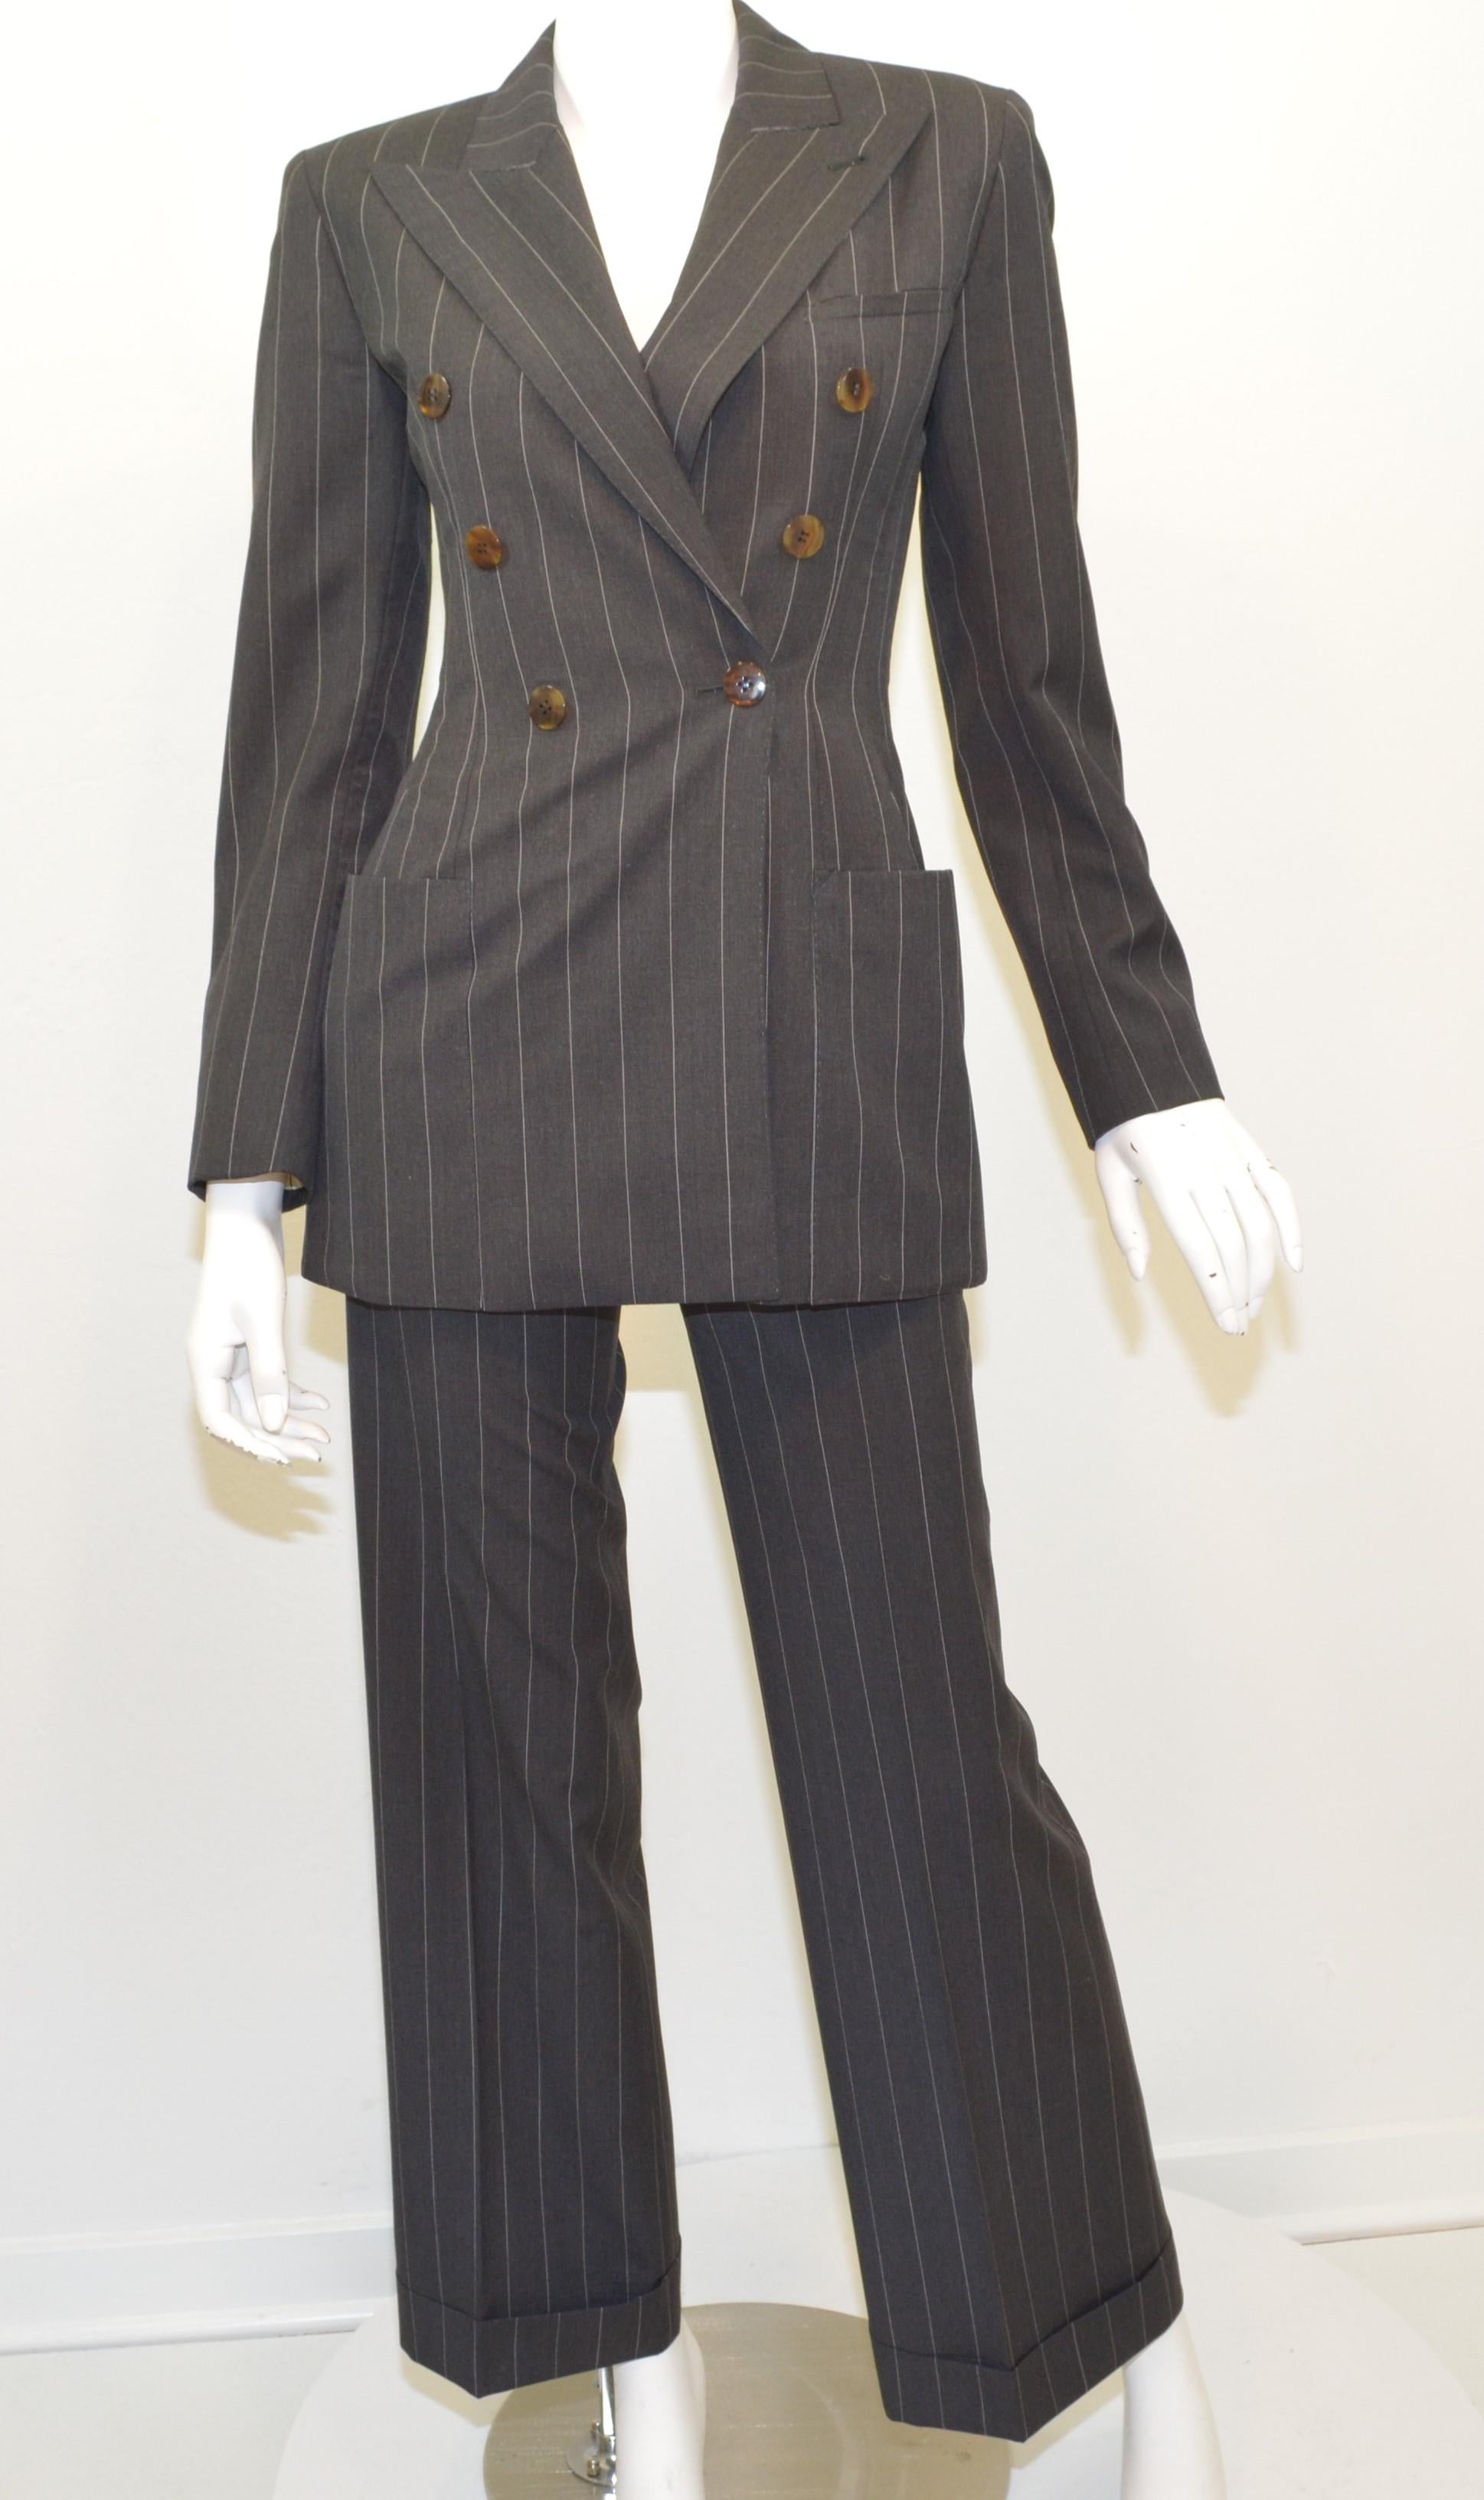 Jean Paul Gaultier Pinstripe Jacket and Pants Suit Set -- featured is grey with a pinstriped pattern throughout. Jacket has button fastenings at the front and an amazing animal print lining. Pants have a zipper and button fastening. Made in Italy,